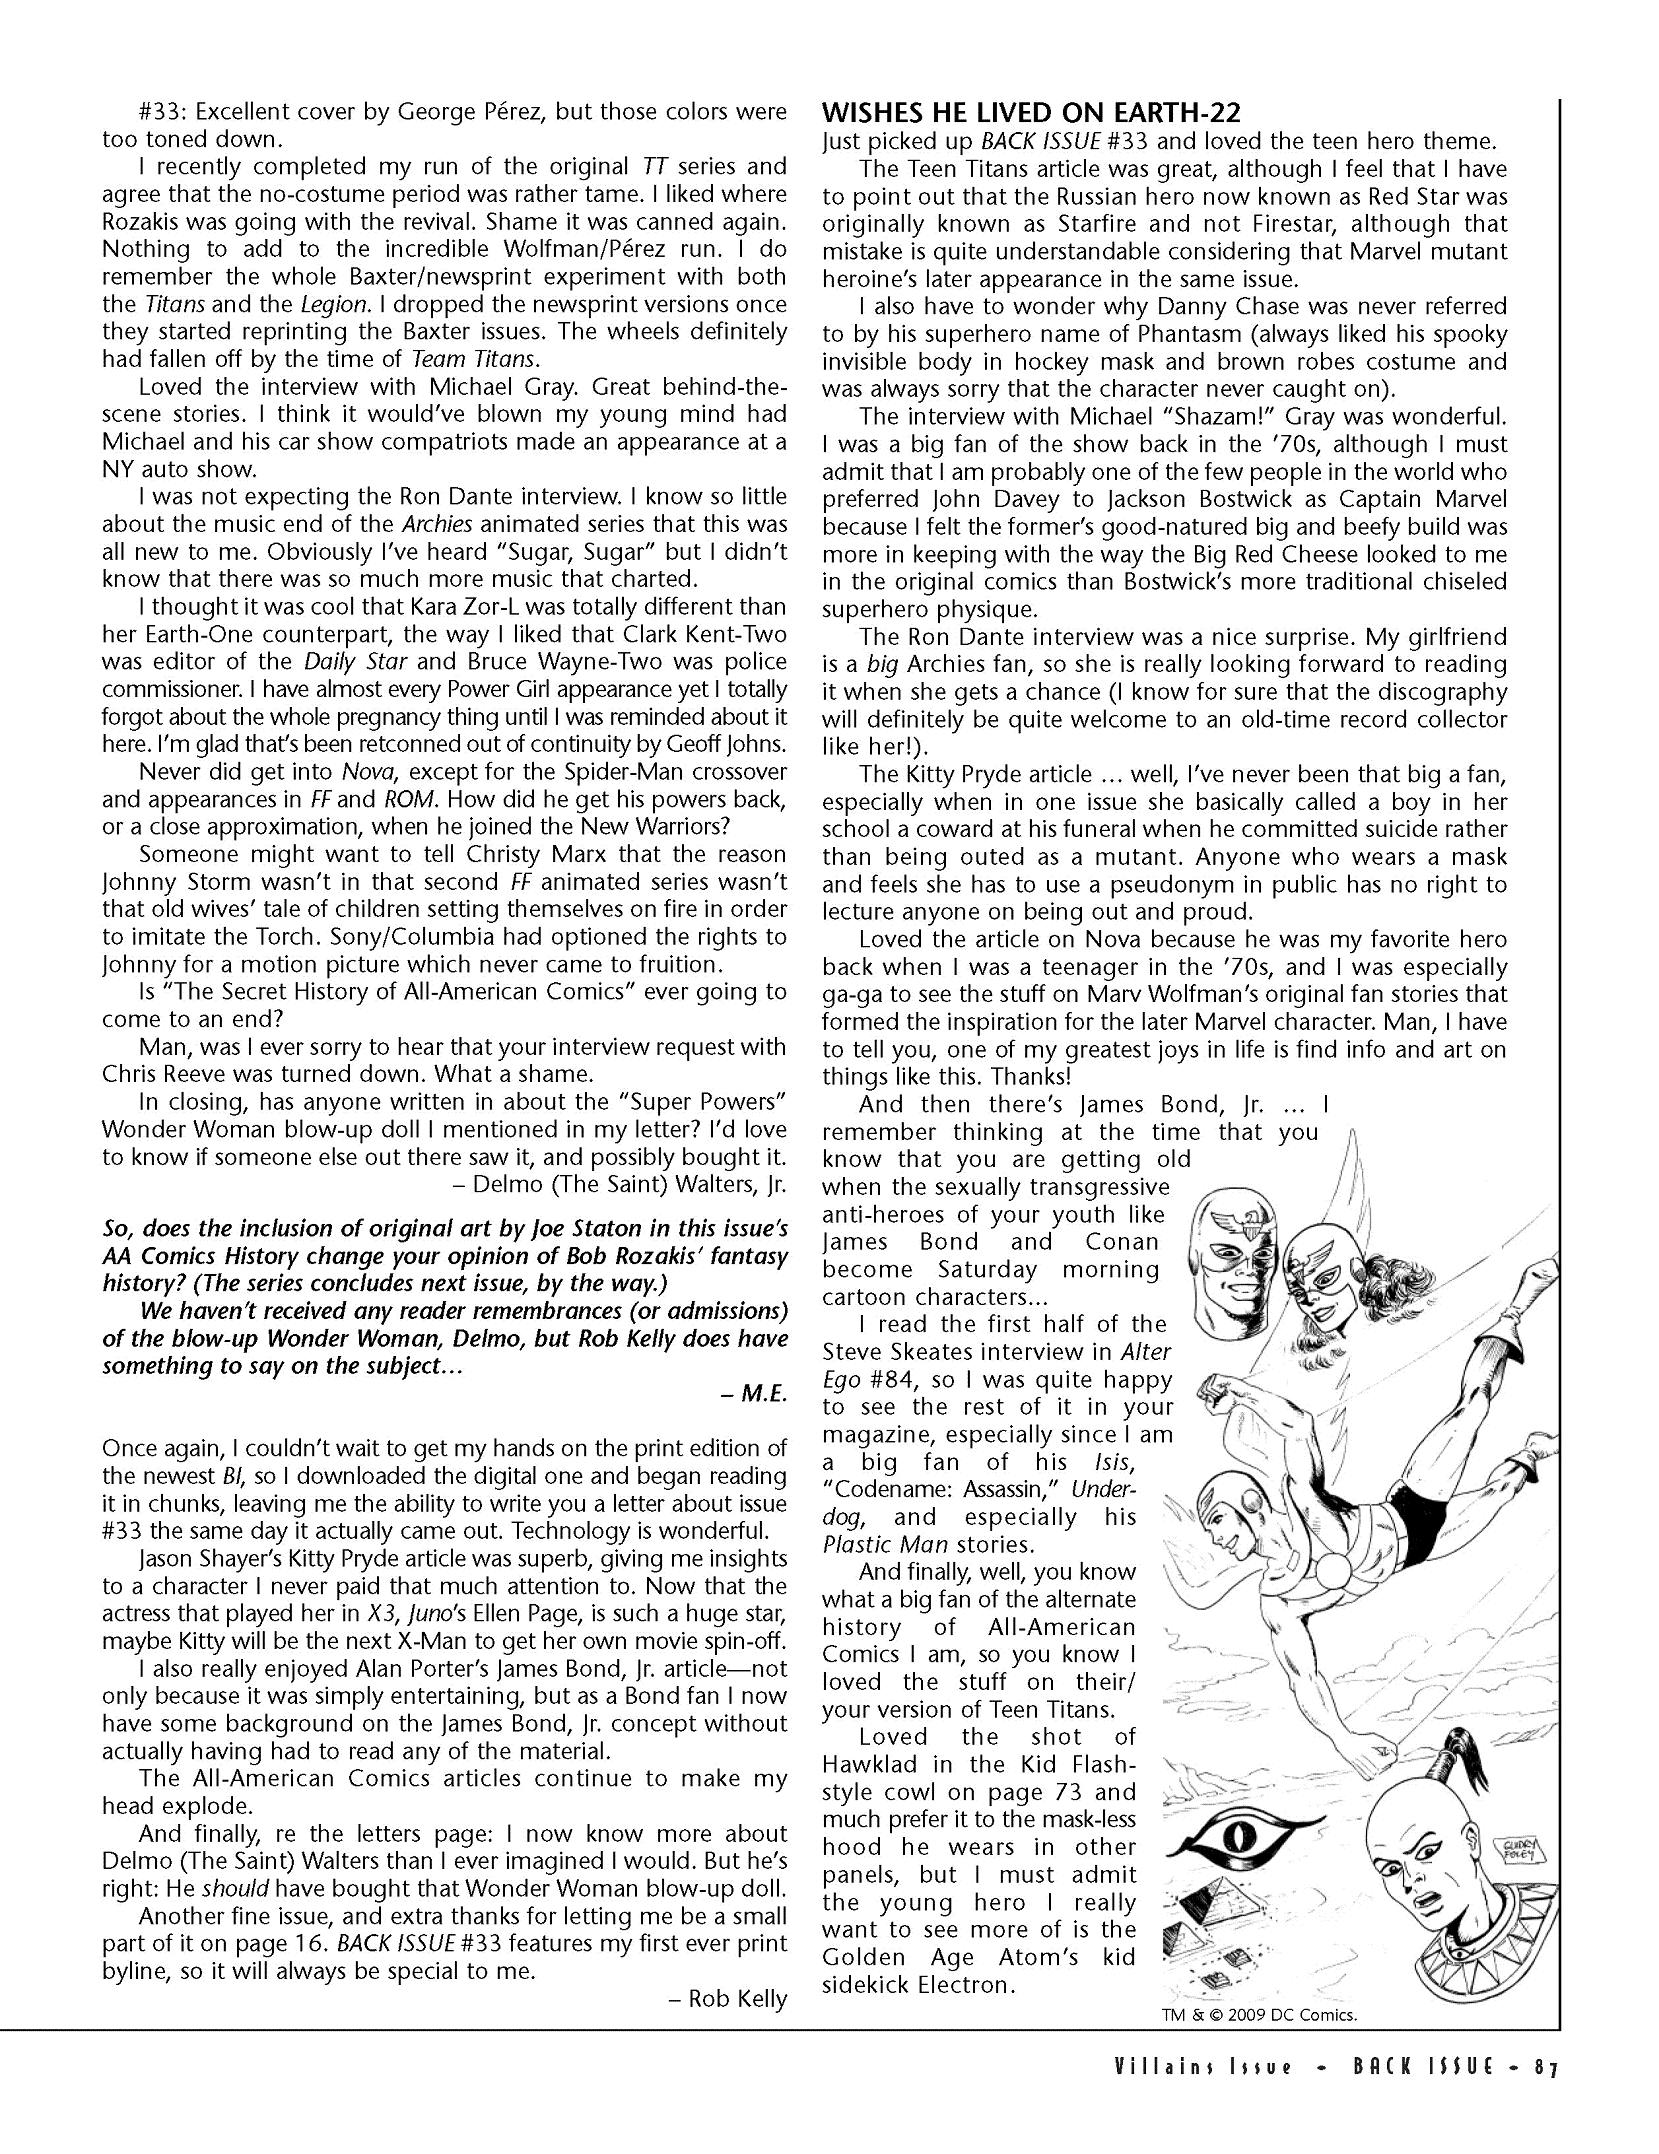 Read online Back Issue comic -  Issue #35 - 89